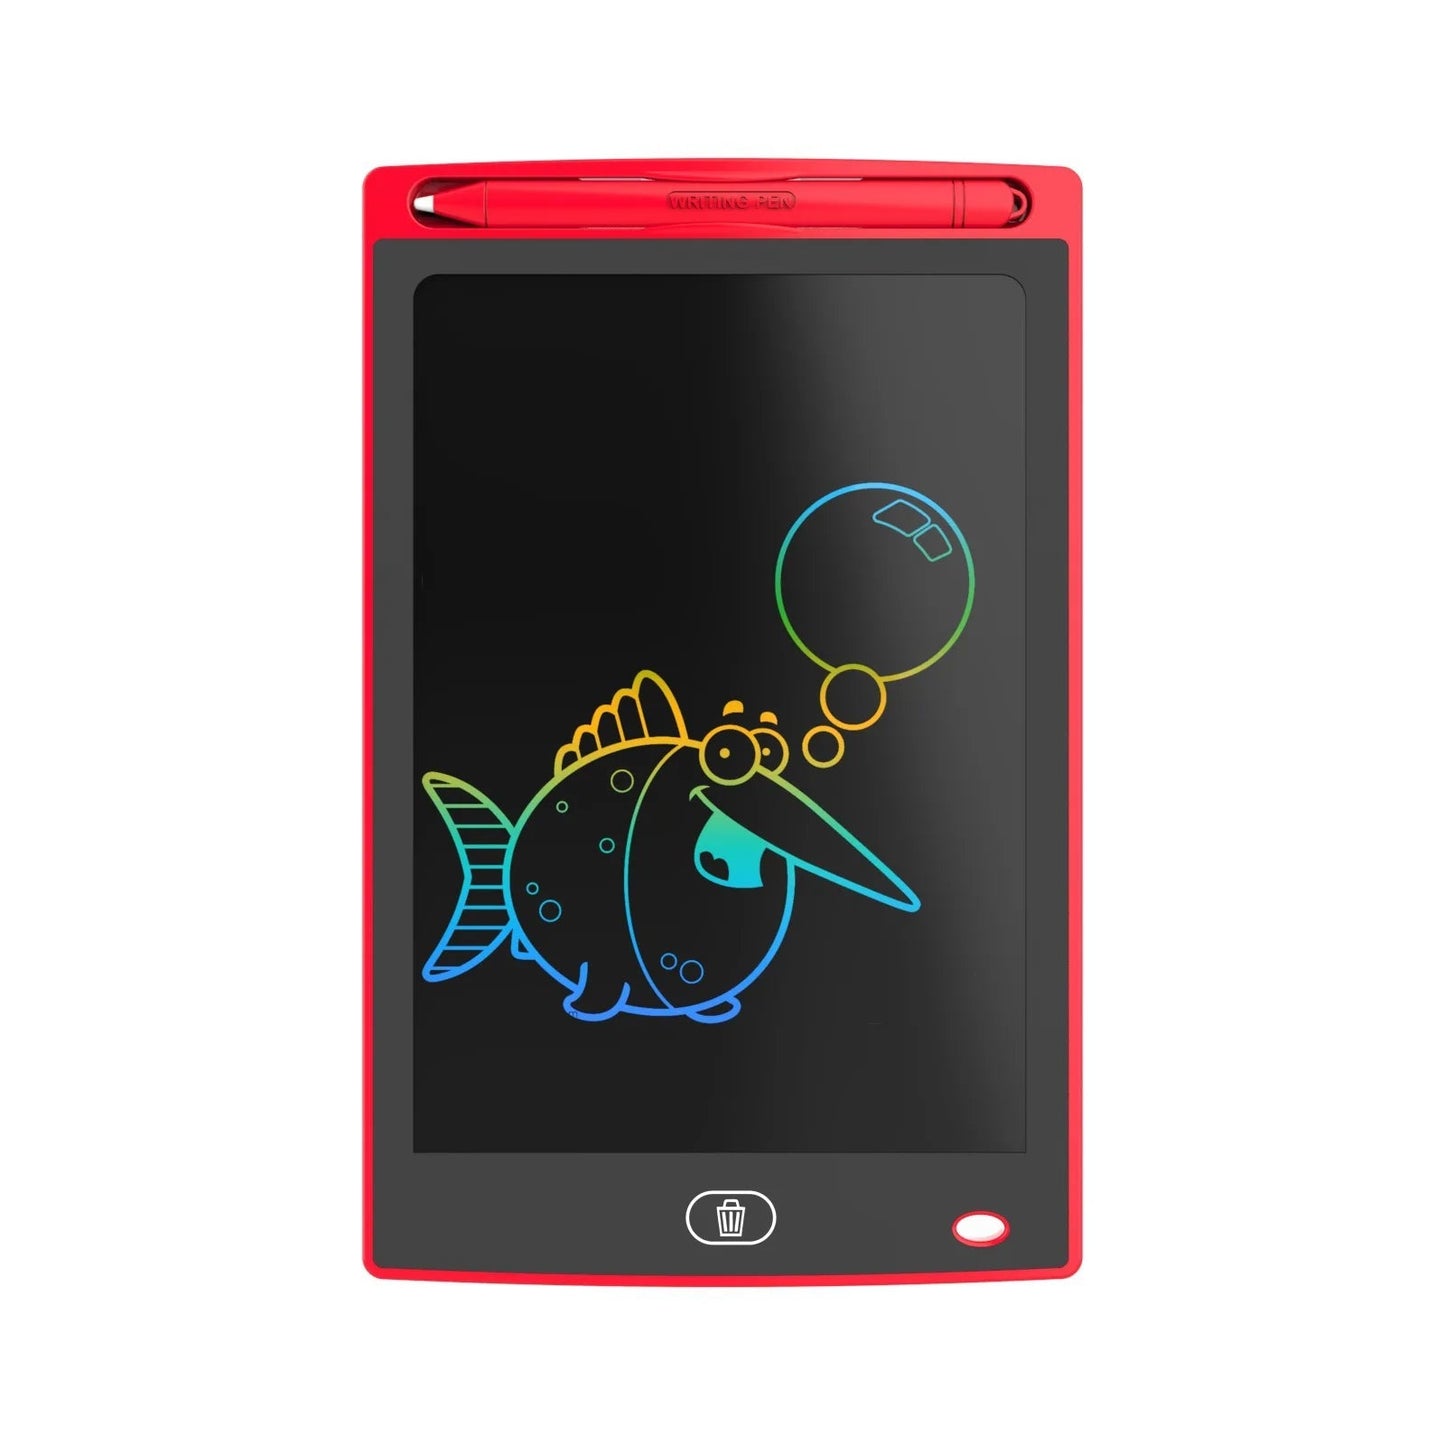 Toys For Children 8.5inch Electronic Drawing Board Lcd Screen Writing